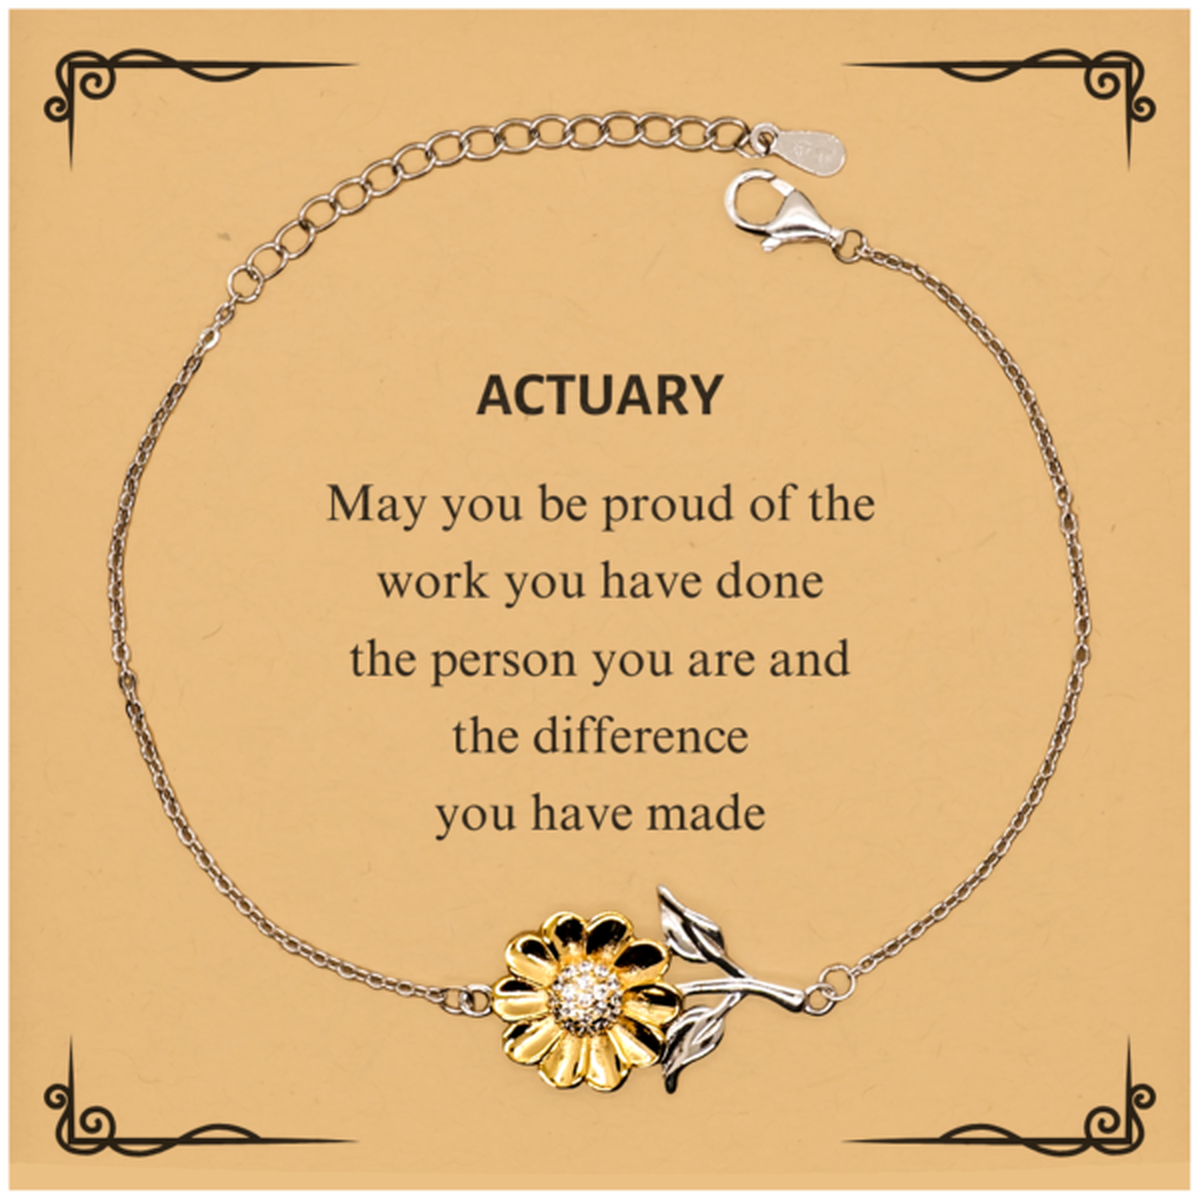 Actuary May you be proud of the work you have done, Retirement Actuary Sunflower Bracelet for Colleague Appreciation Gifts Amazing for Actuary